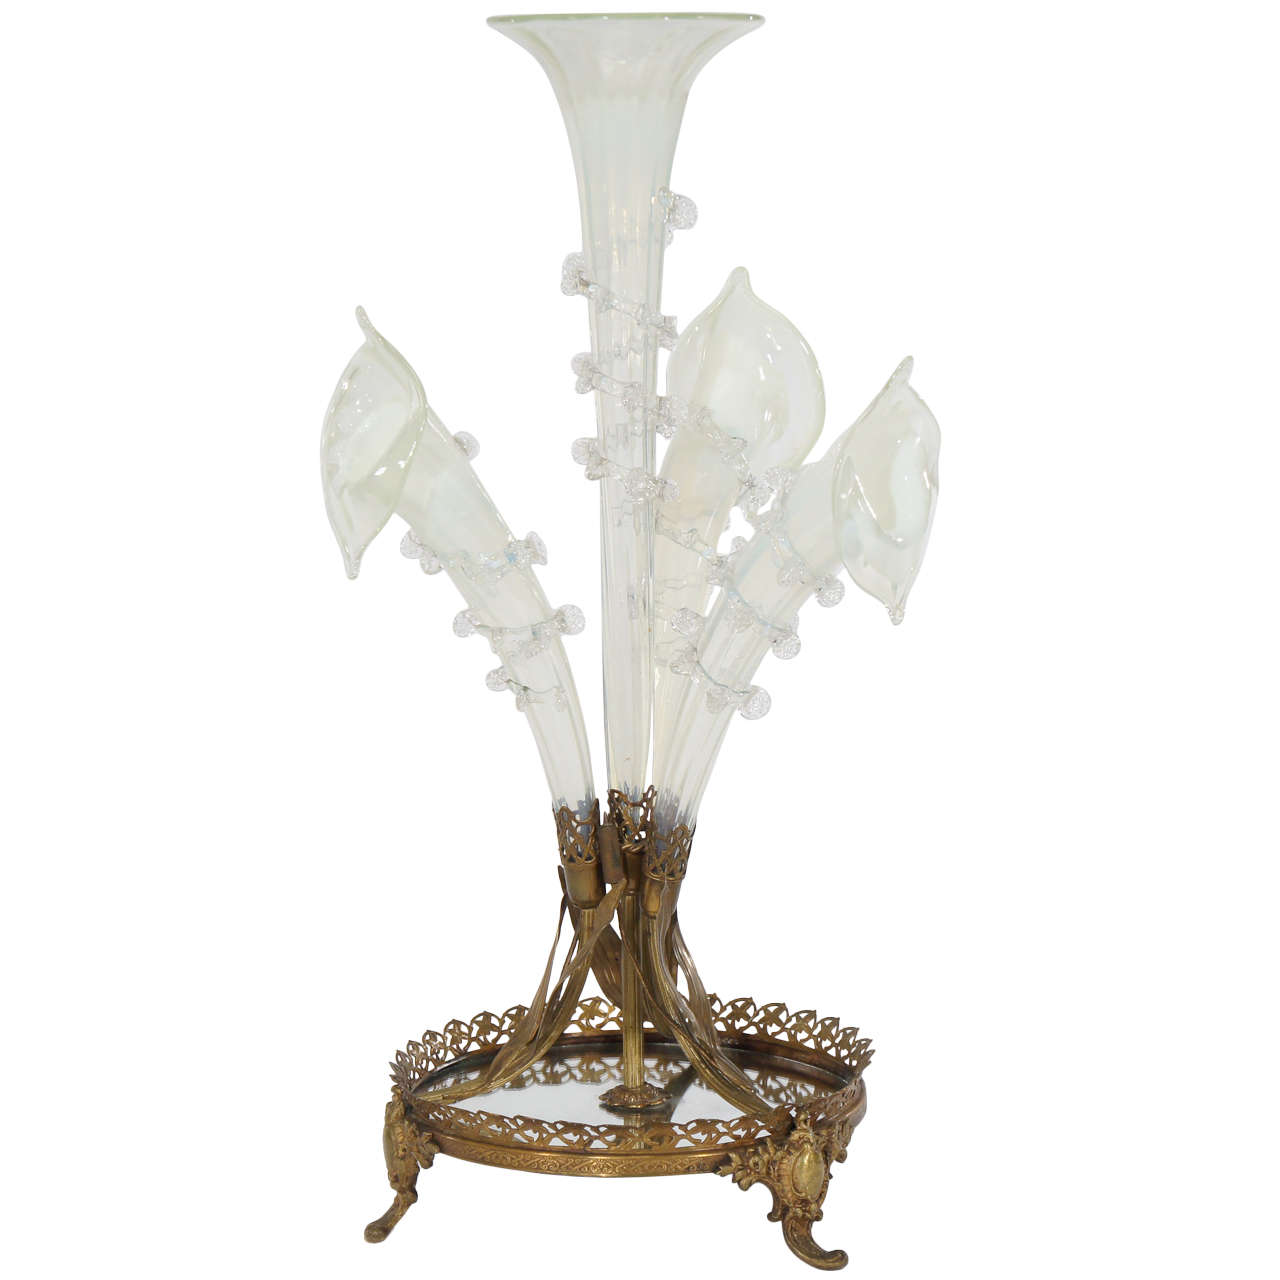 Outstanding Art Nouveau Calla Lily 19th Century Epergne on Plateau For Sale